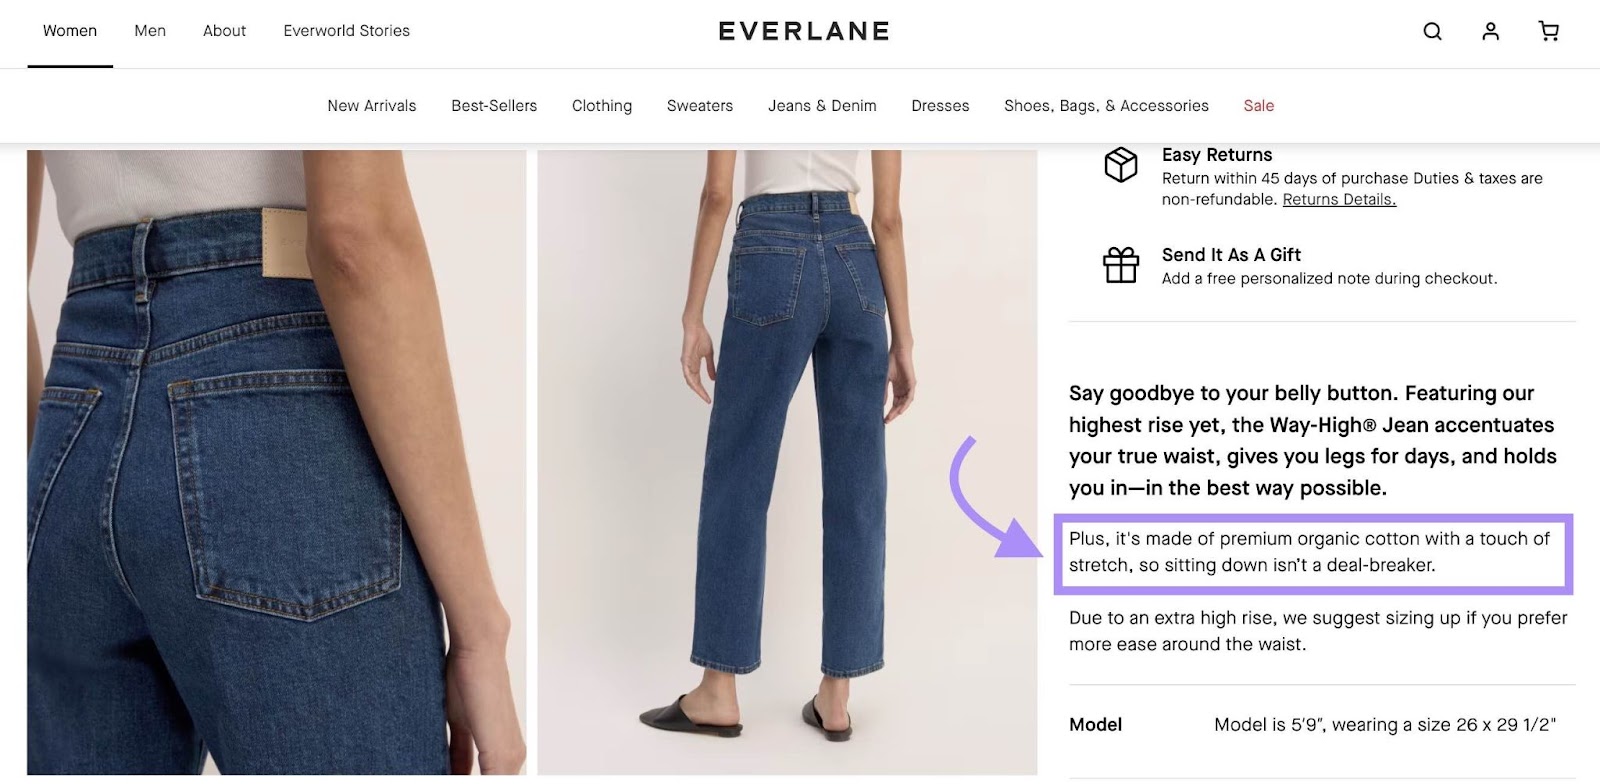 Everlane's product description for a pair of jeans